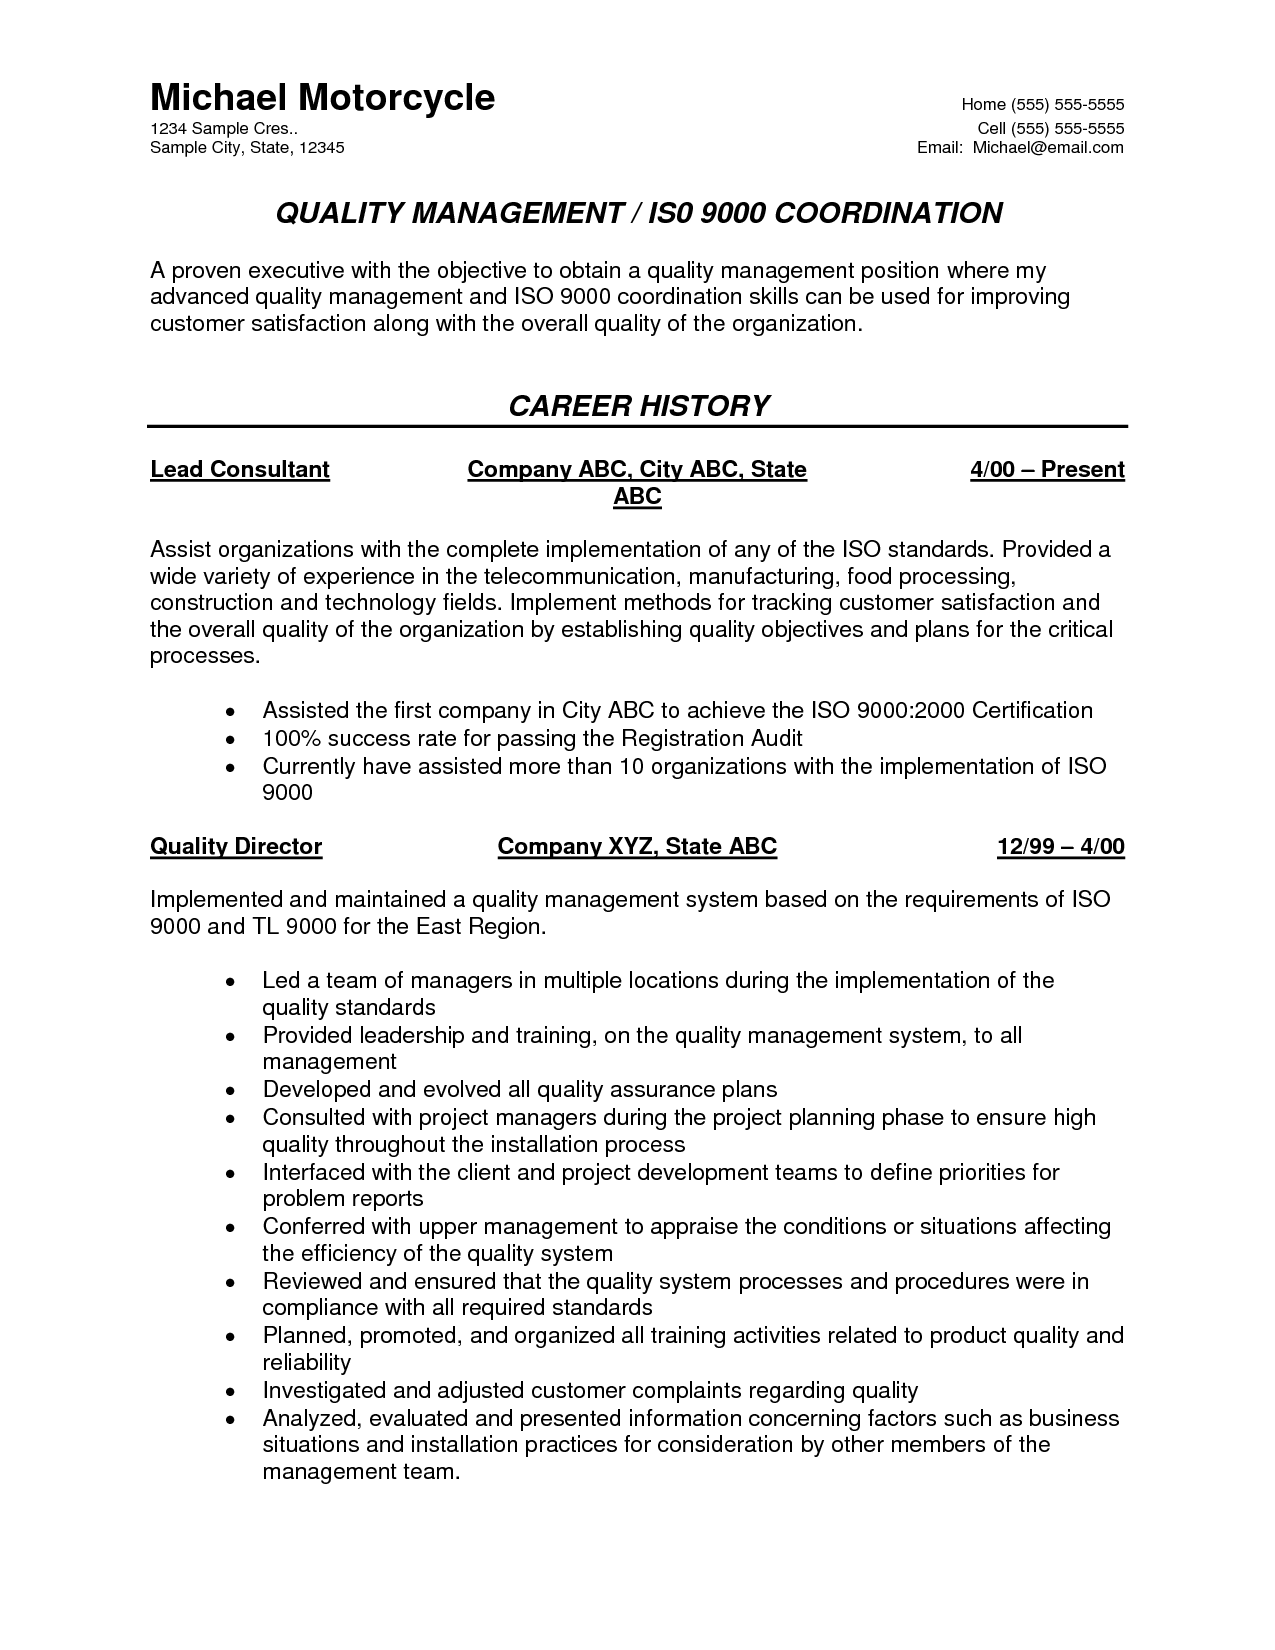 Resume Format Quality Control Manager 